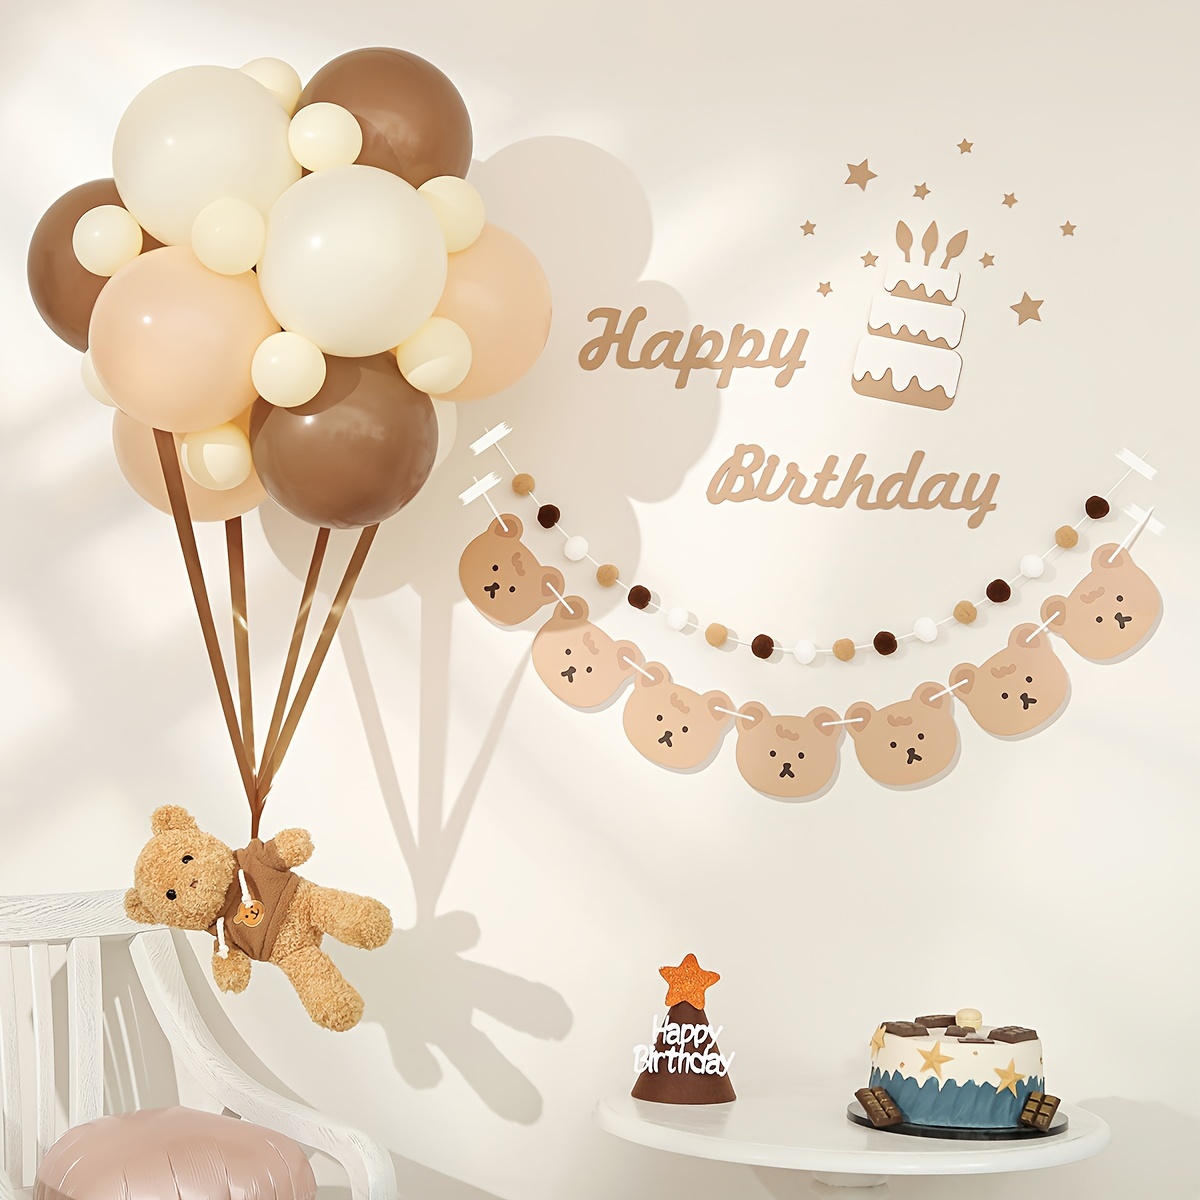  25pcs cute bear Birthday Party Supplies,The cute bear Birthday  Party Cupcake Toppers for Kids Gift Birthday Party Favors : Toys & Games